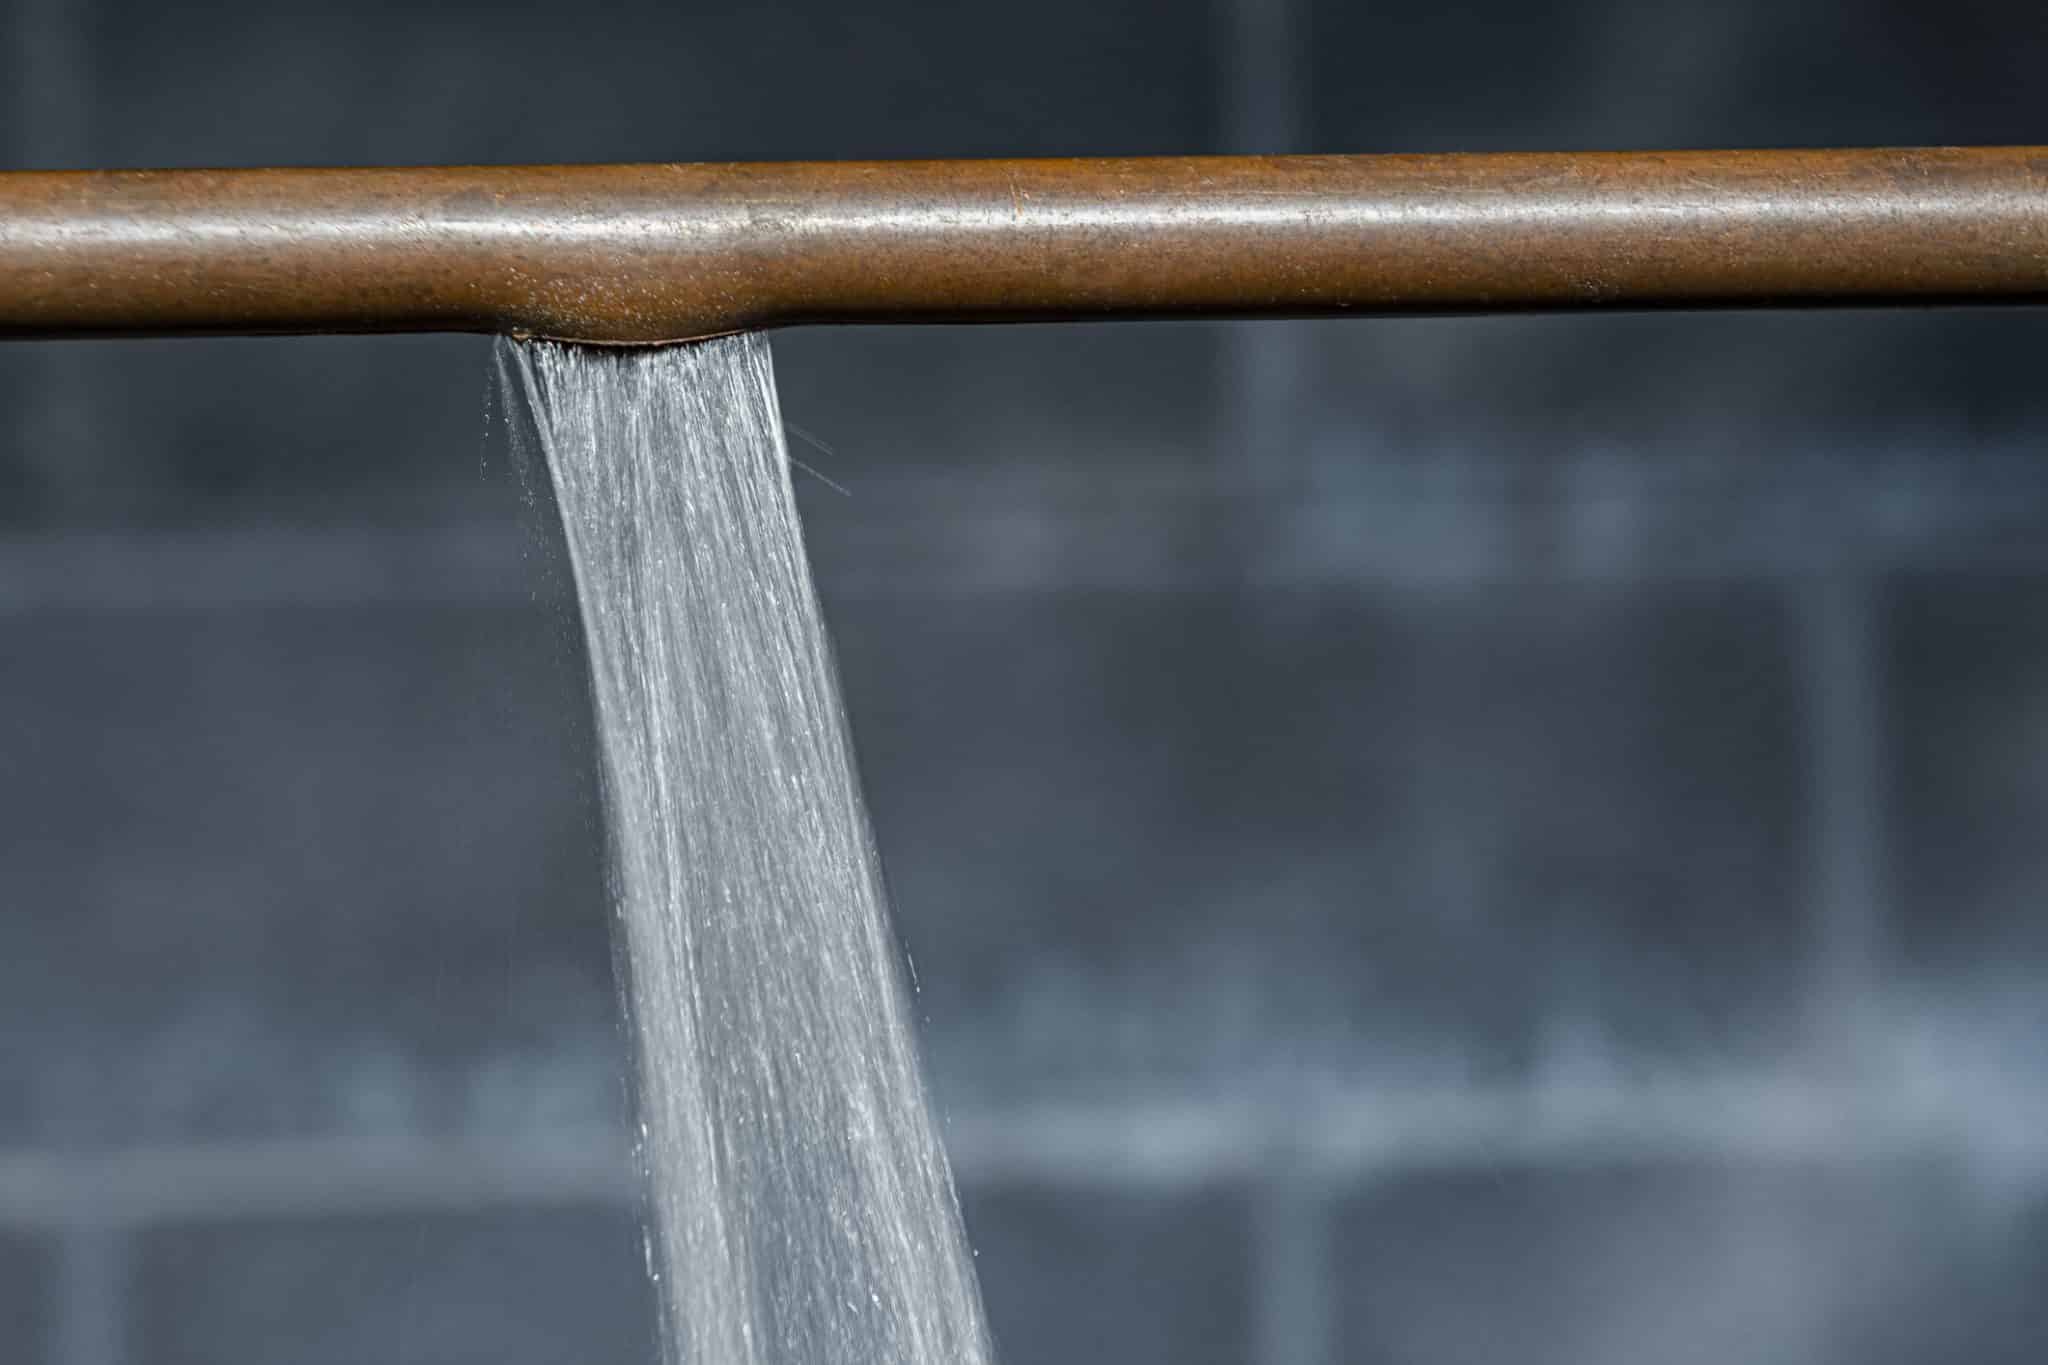 A horizontal copper pipe, spraying water against a blurry brick background.